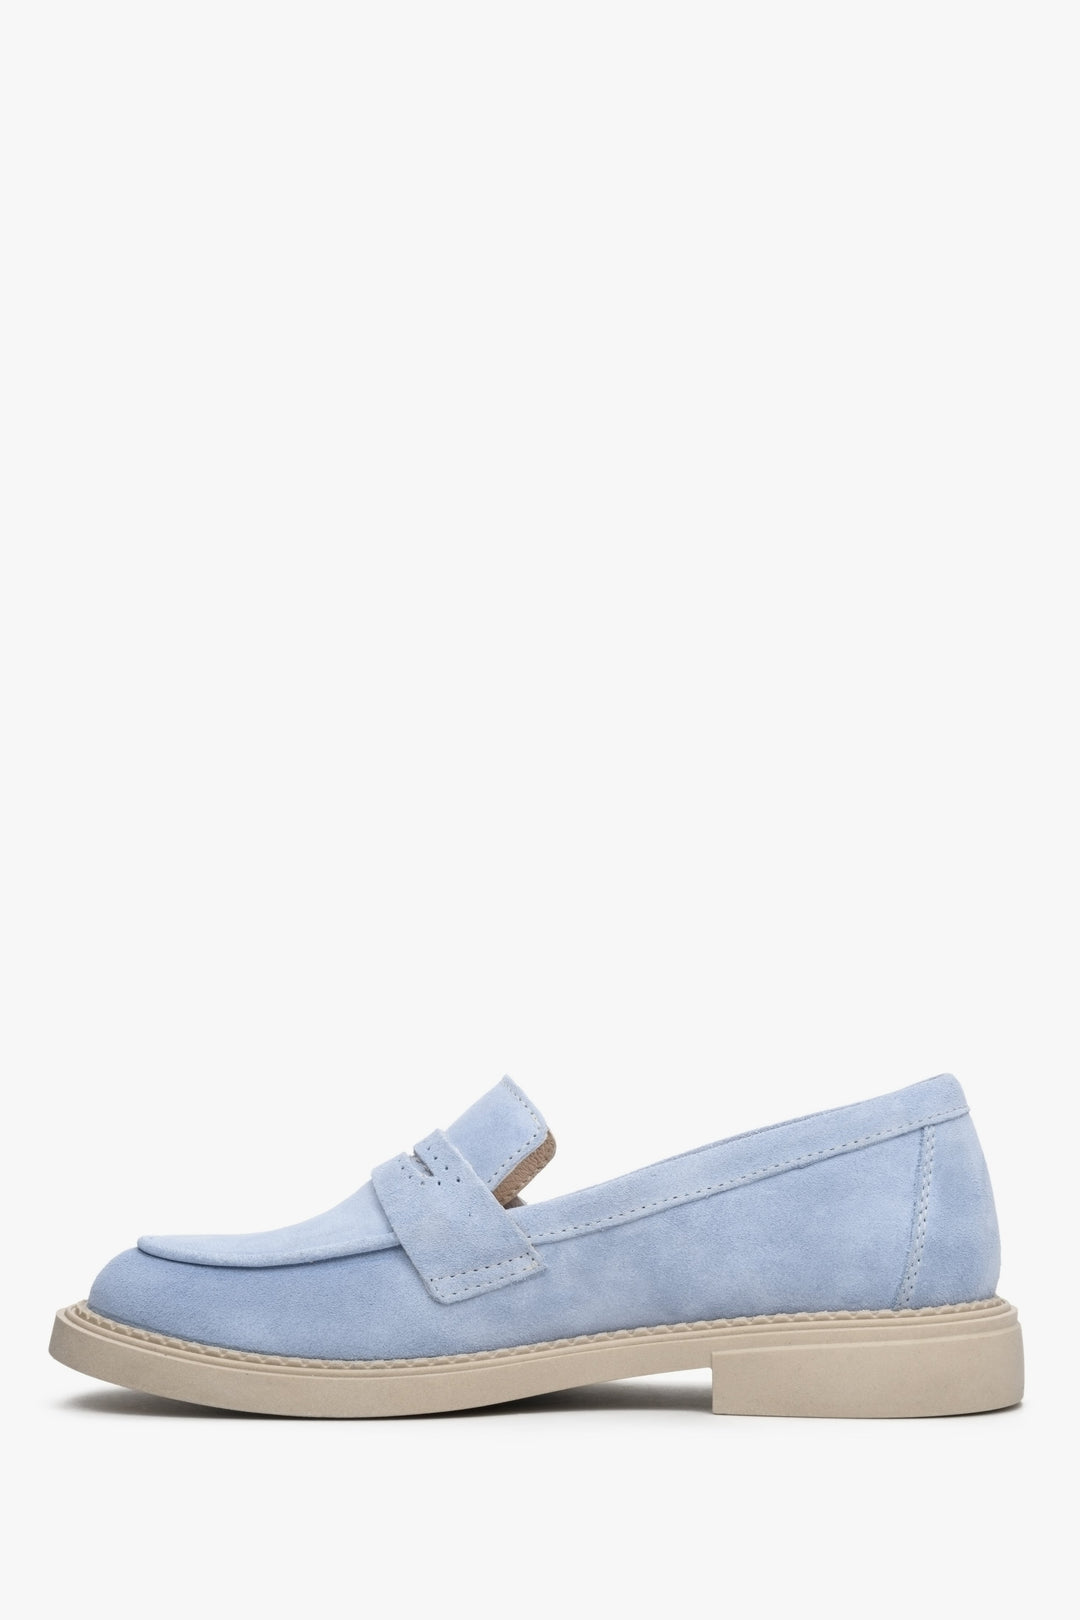 Women's suede loafers in light blue color by Estro - shoe profile.